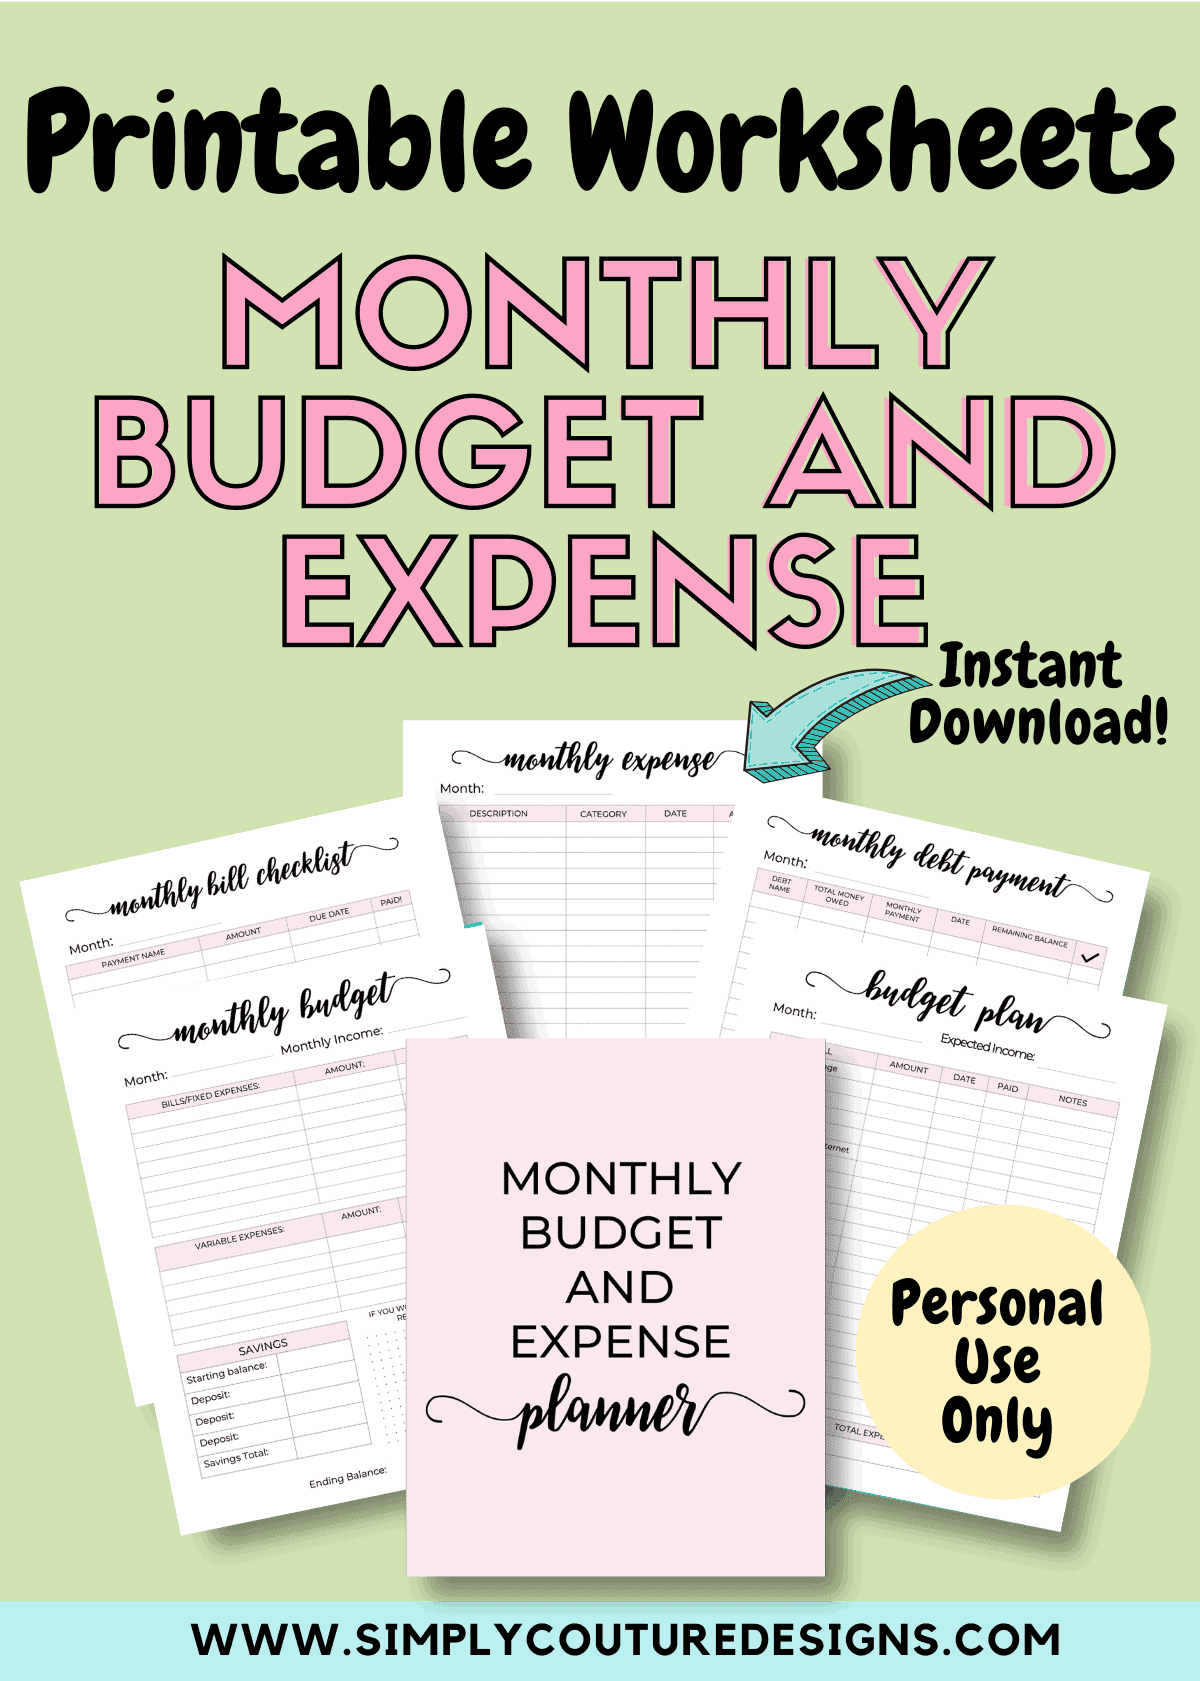 Monthly budget and expense planner printable #budgetplanner #expenseplanner #debttracker